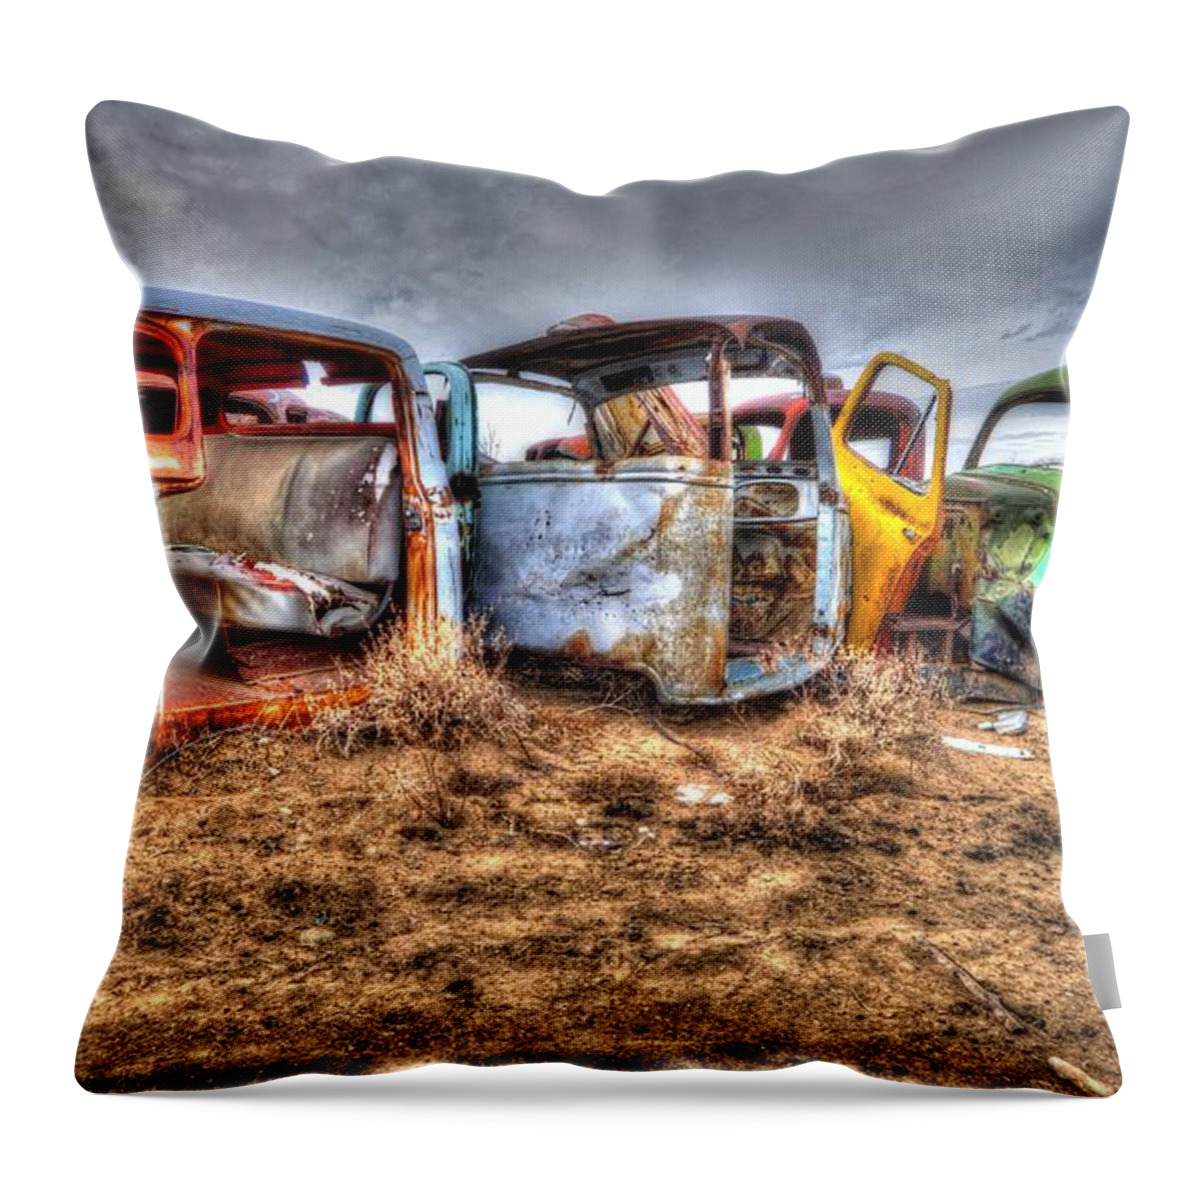 Salvage Yard Throw Pillow featuring the photograph Salvage Yard by Craig Incardone